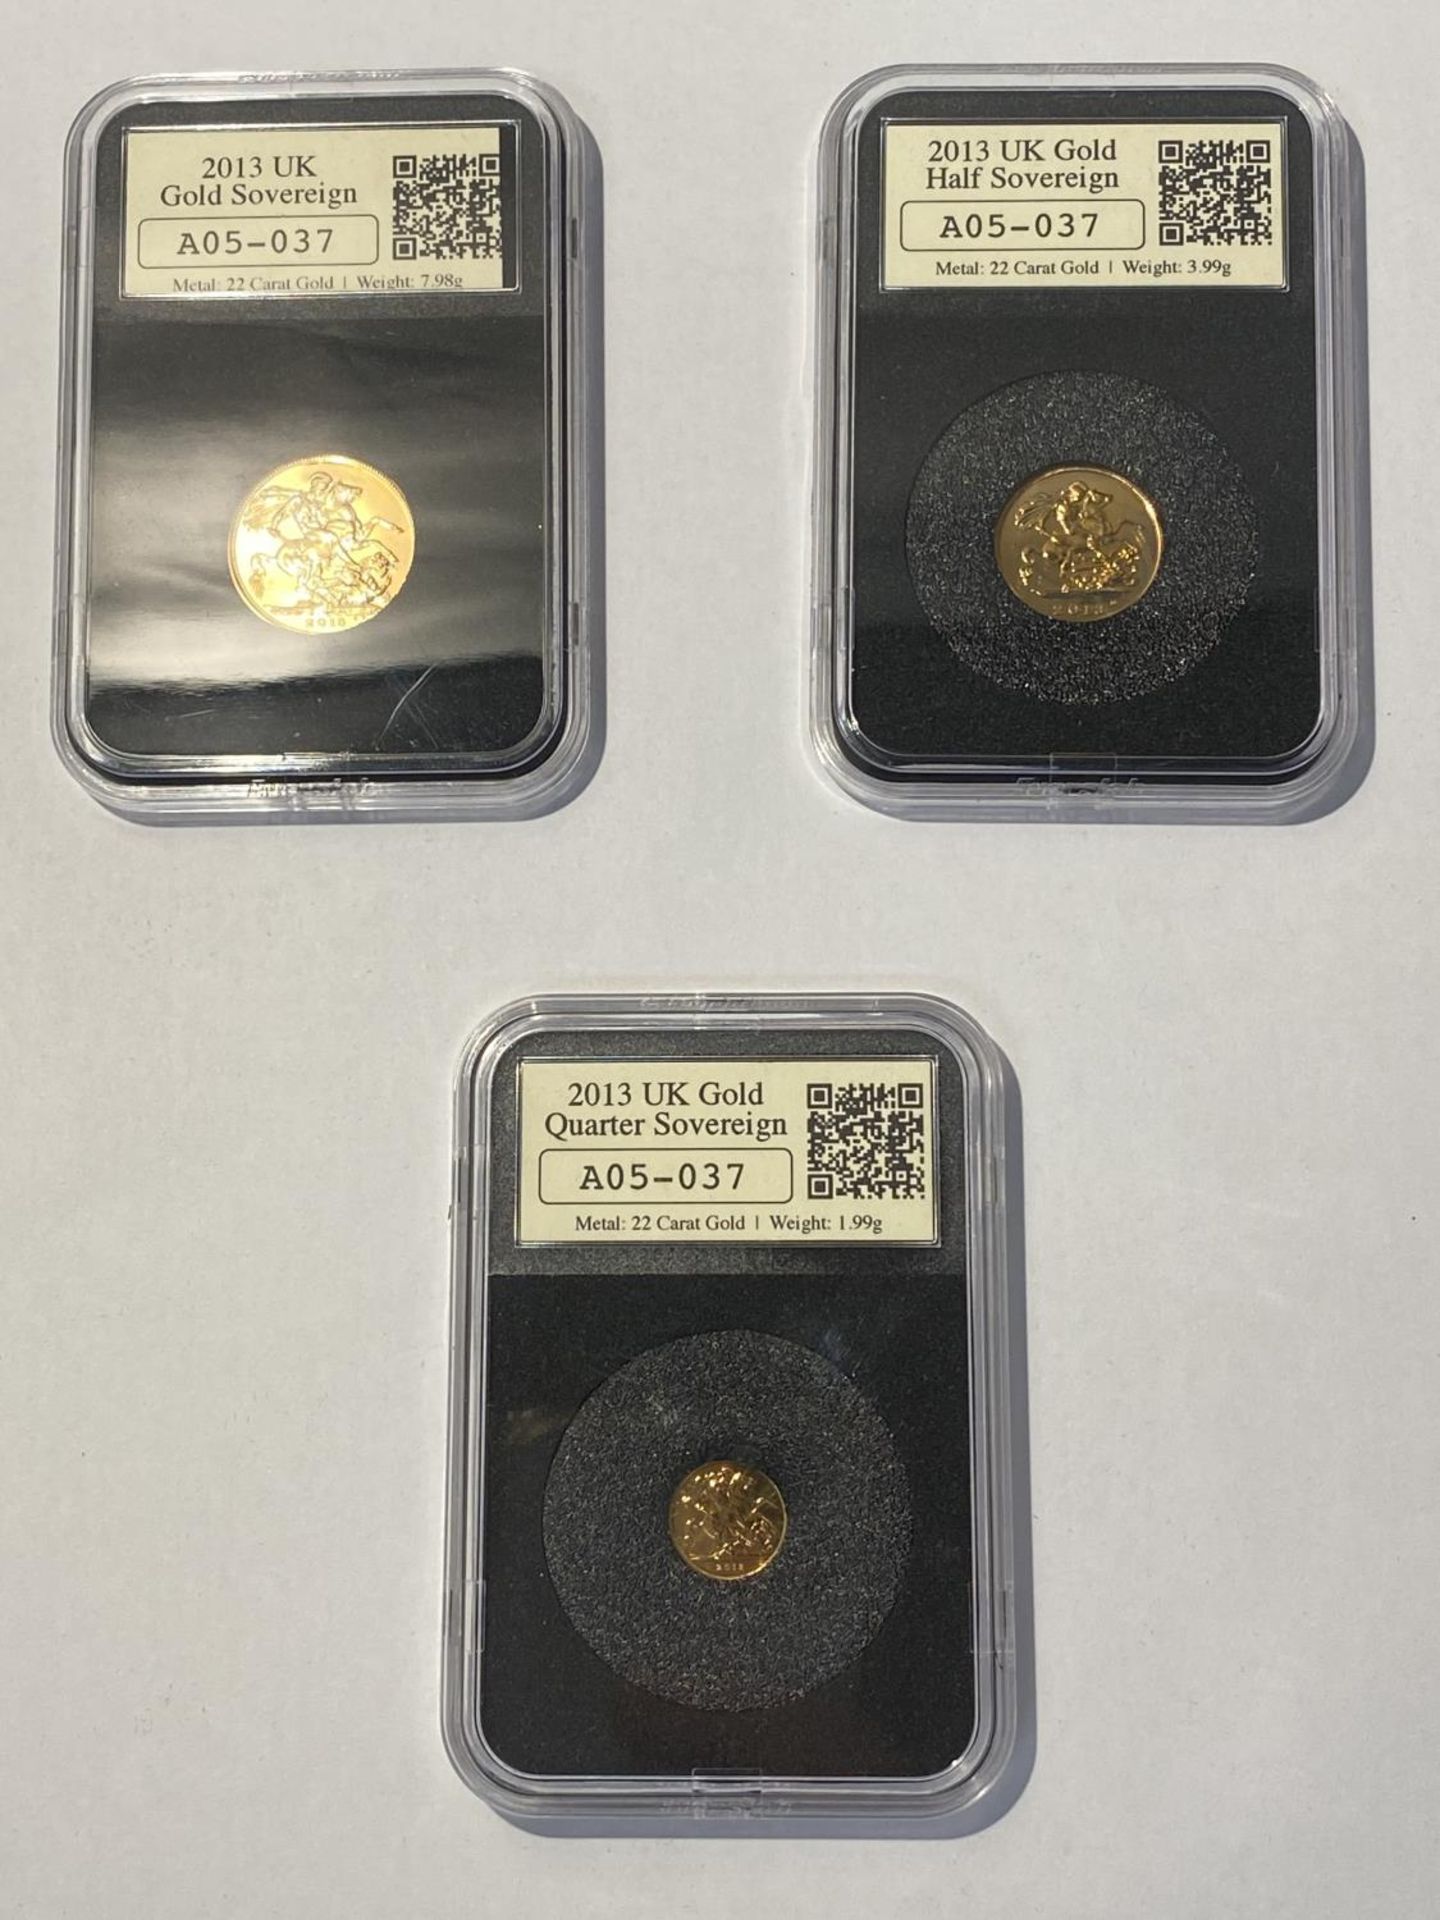 A UK GOLD SOVEREIGN, HALF SOVEREIGN AND QUARTER SOVEREIGN, QUEEN ELIZABETH 11, 2013, NEATLY